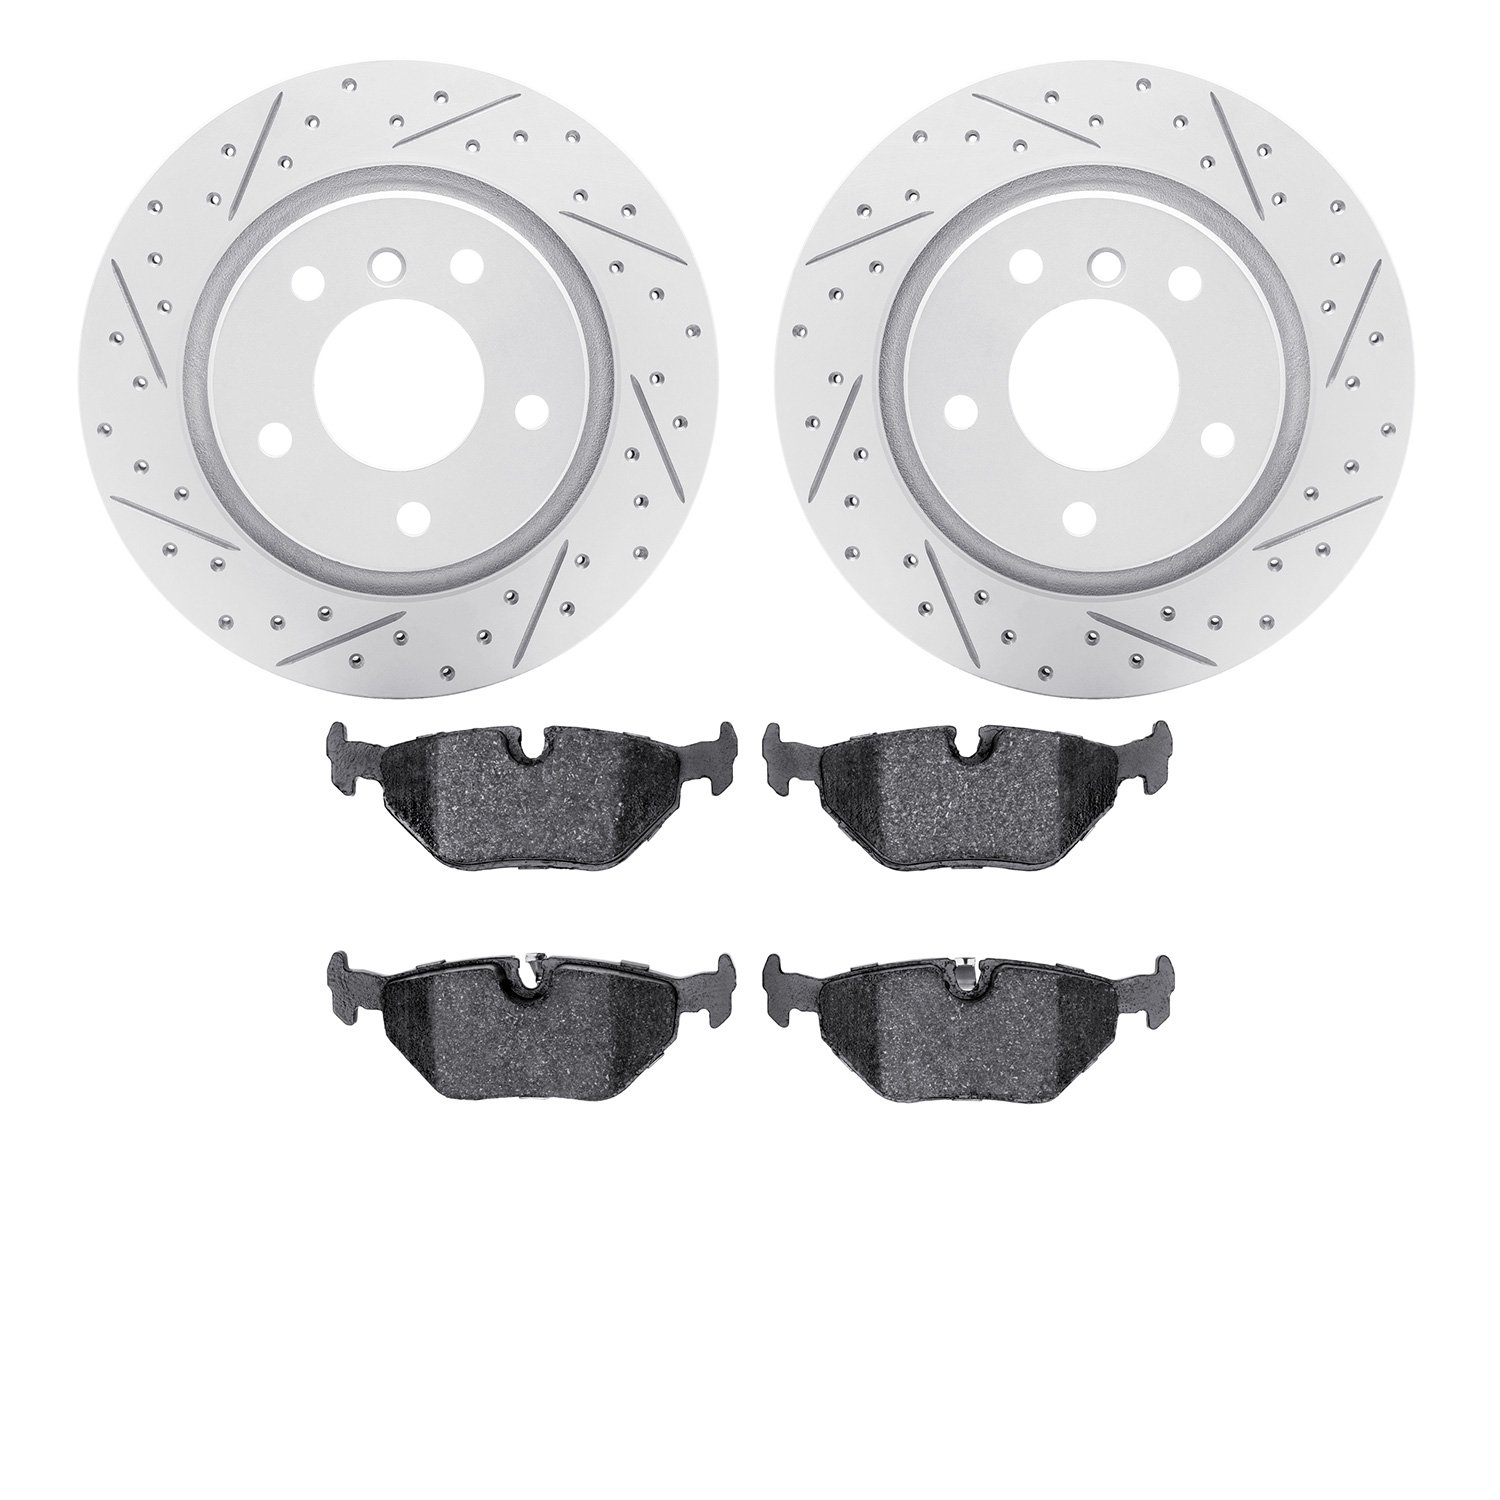 2502-31026 Geoperformance Drilled/Slotted Rotors w/5000 Advanced Brake Pads Kit, 1999-2006 BMW, Position: Rear